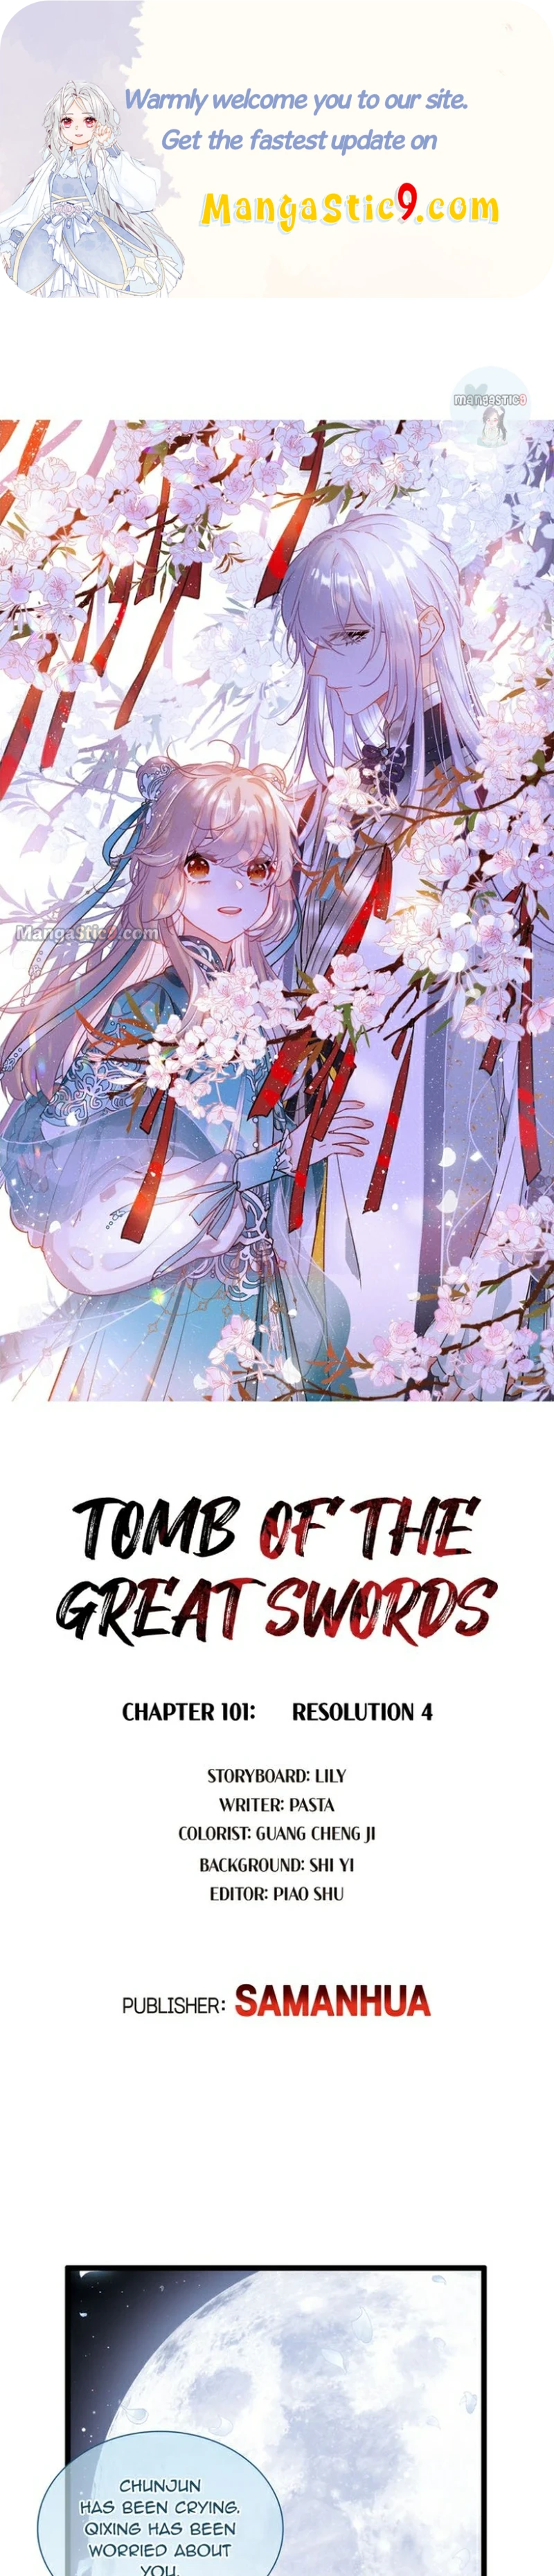 Tomb of the Great Swords Chapter 101